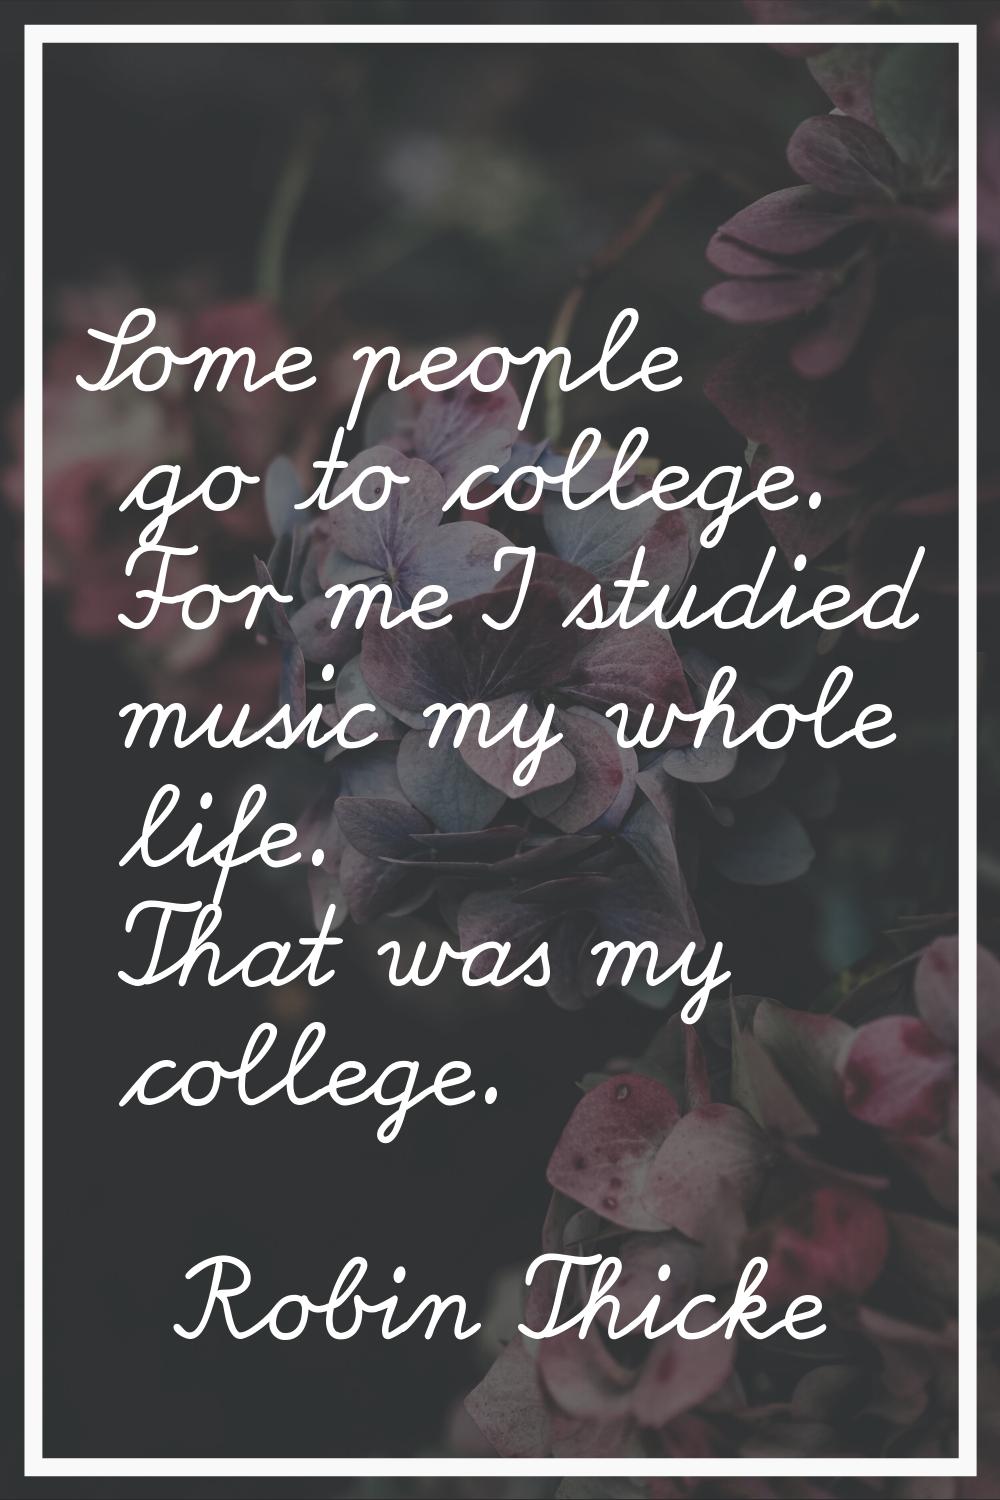 Some people go to college. For me I studied music my whole life. That was my college.